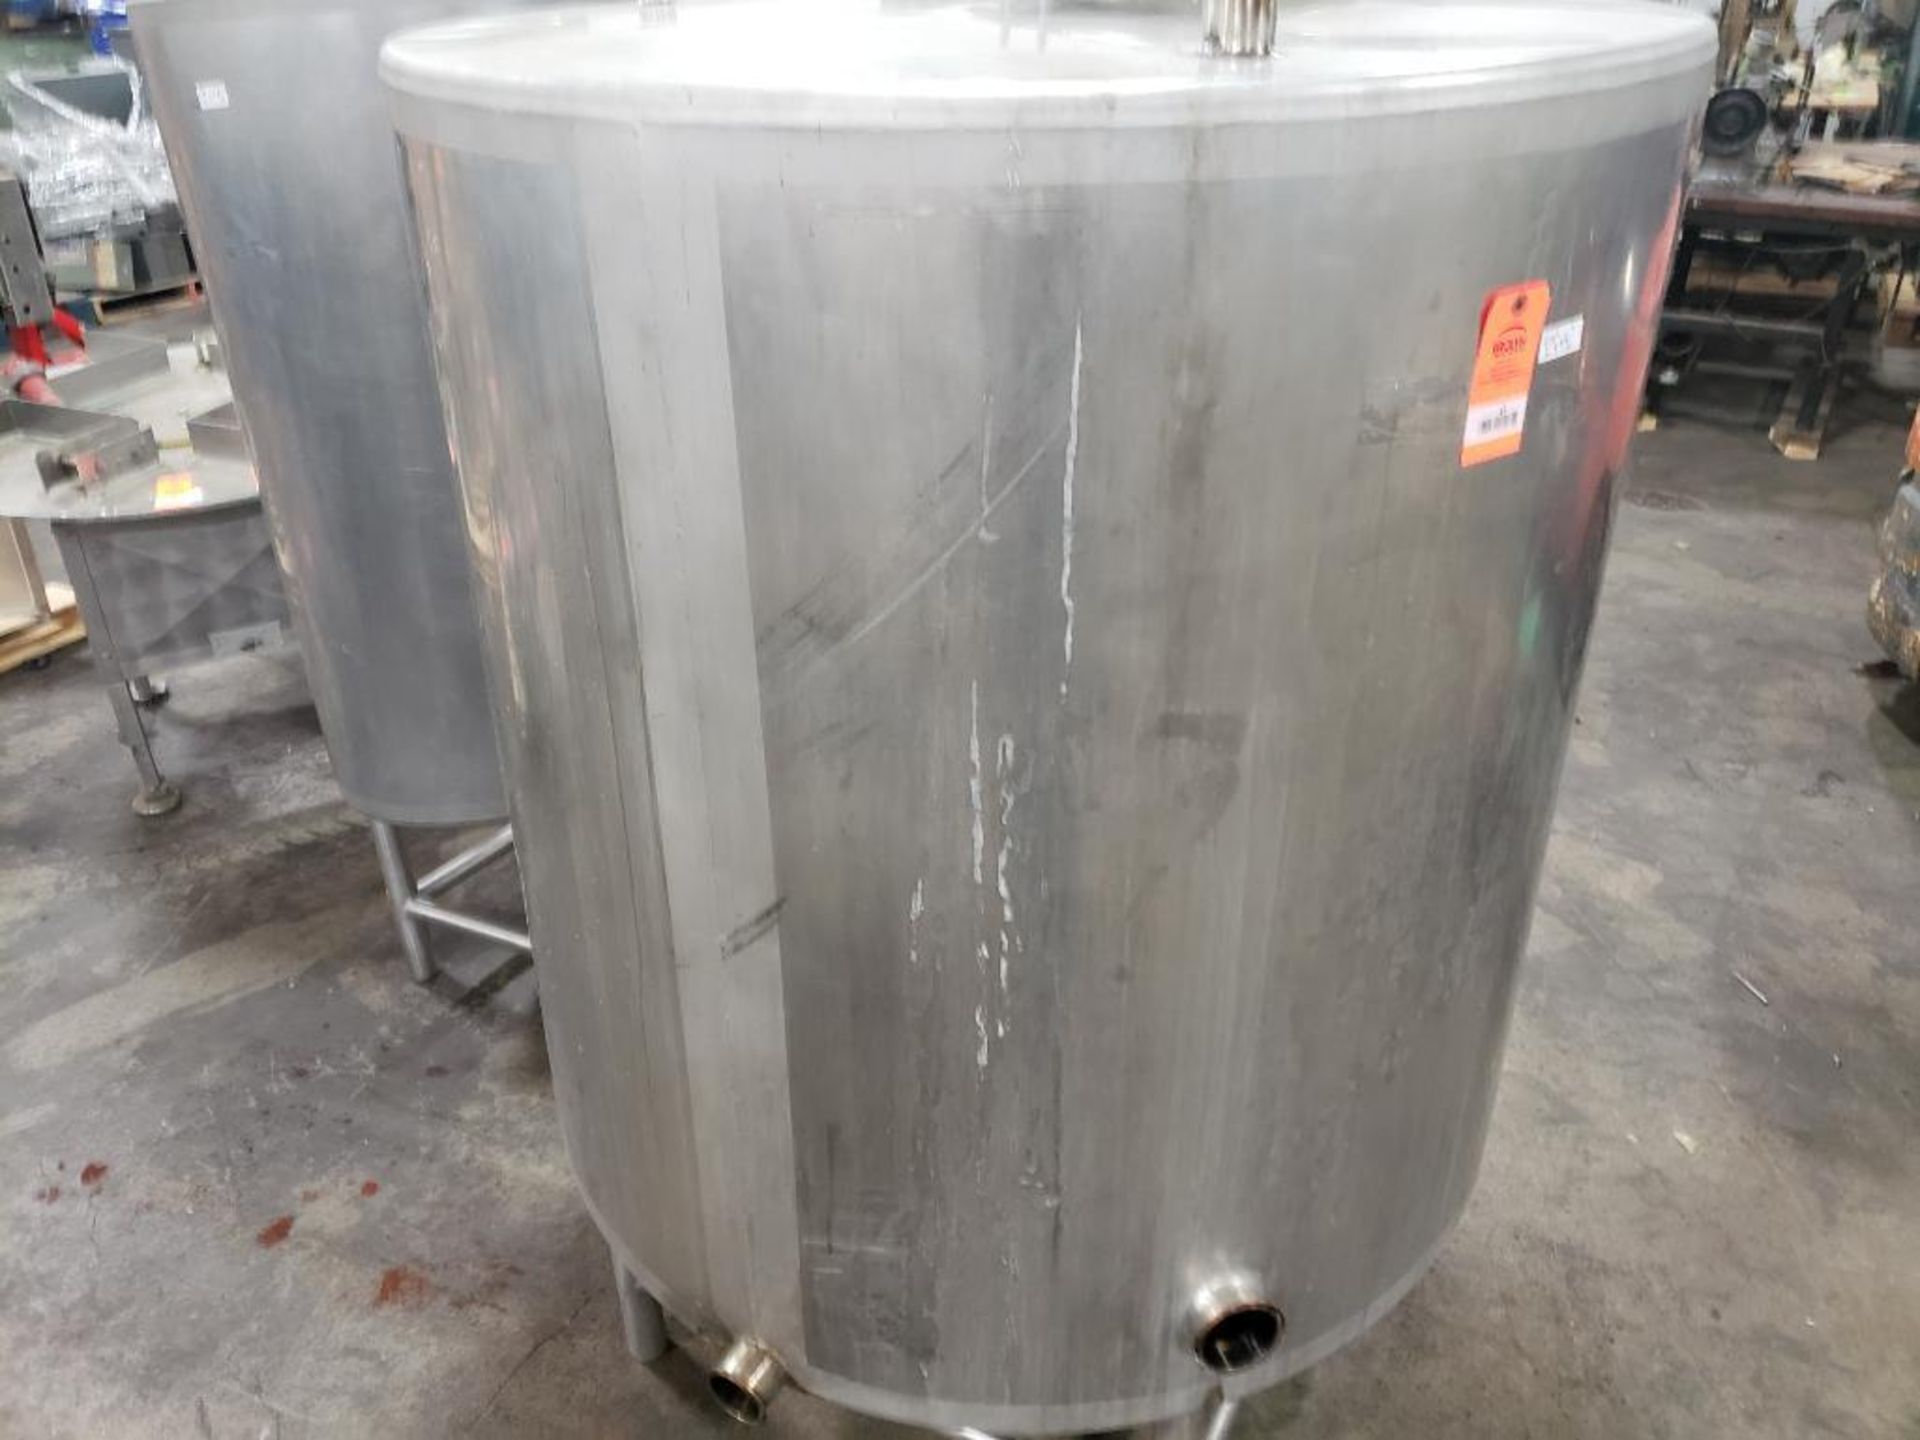 Approx 350 gallon Stainless steel holding tank. Approx dimensions 47in wide by 48in tall. - Image 10 of 12